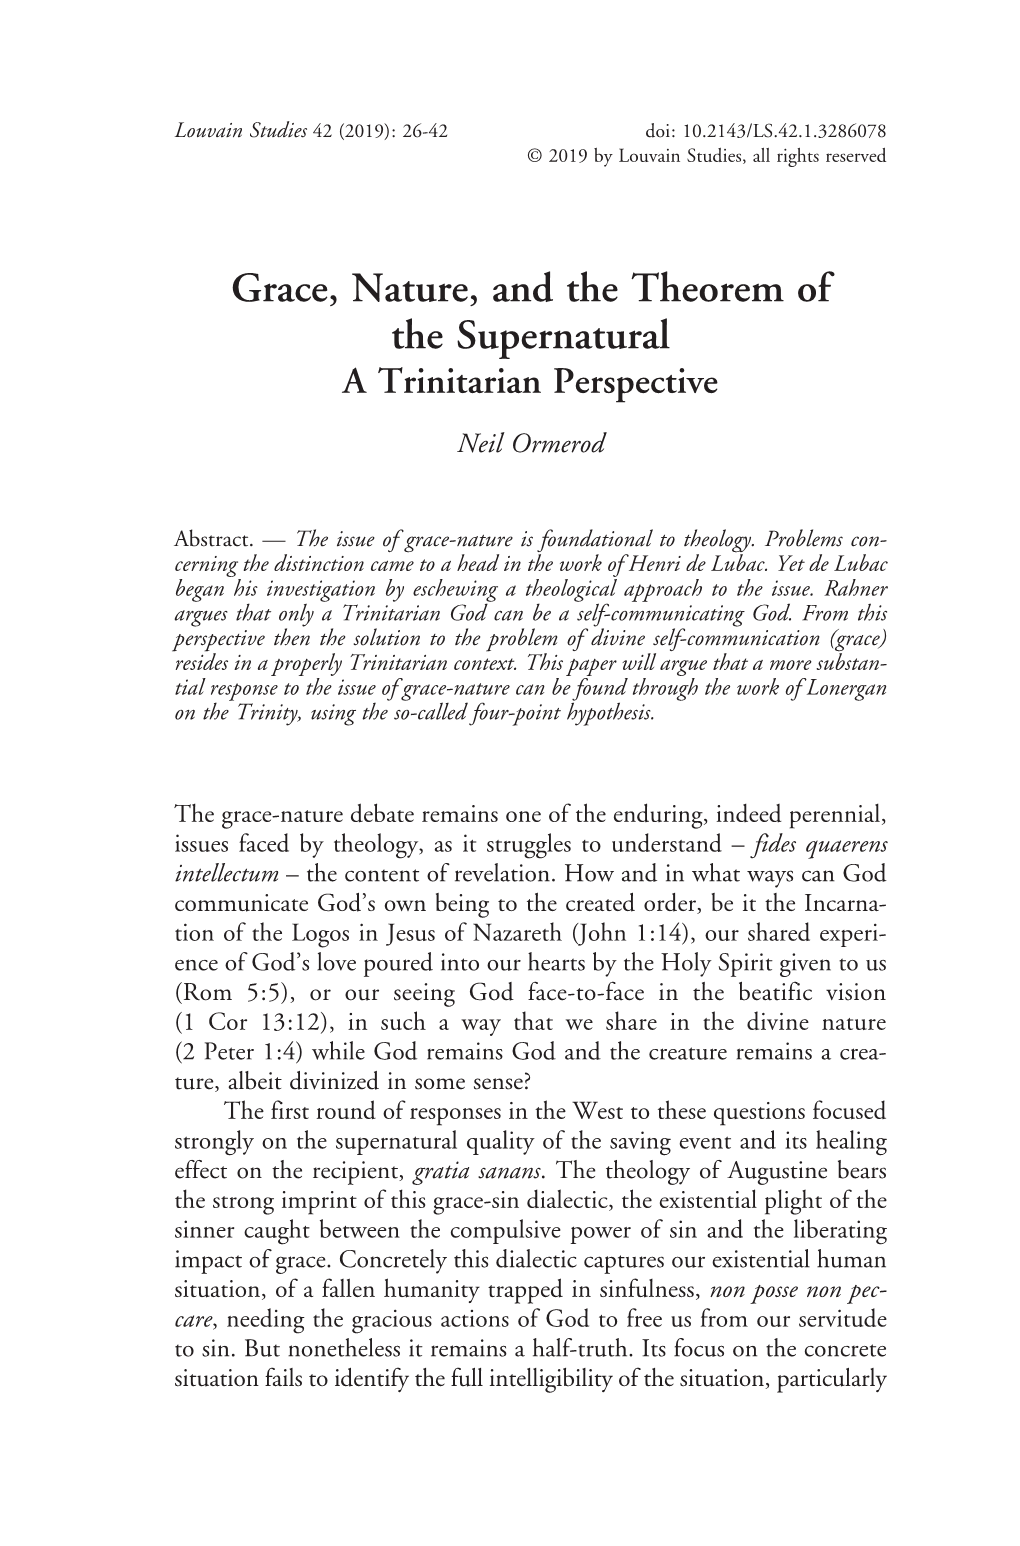 Grace, Nature, and the Theorem of the Supernatural a Trinitarian Perspective Neil Ormerod